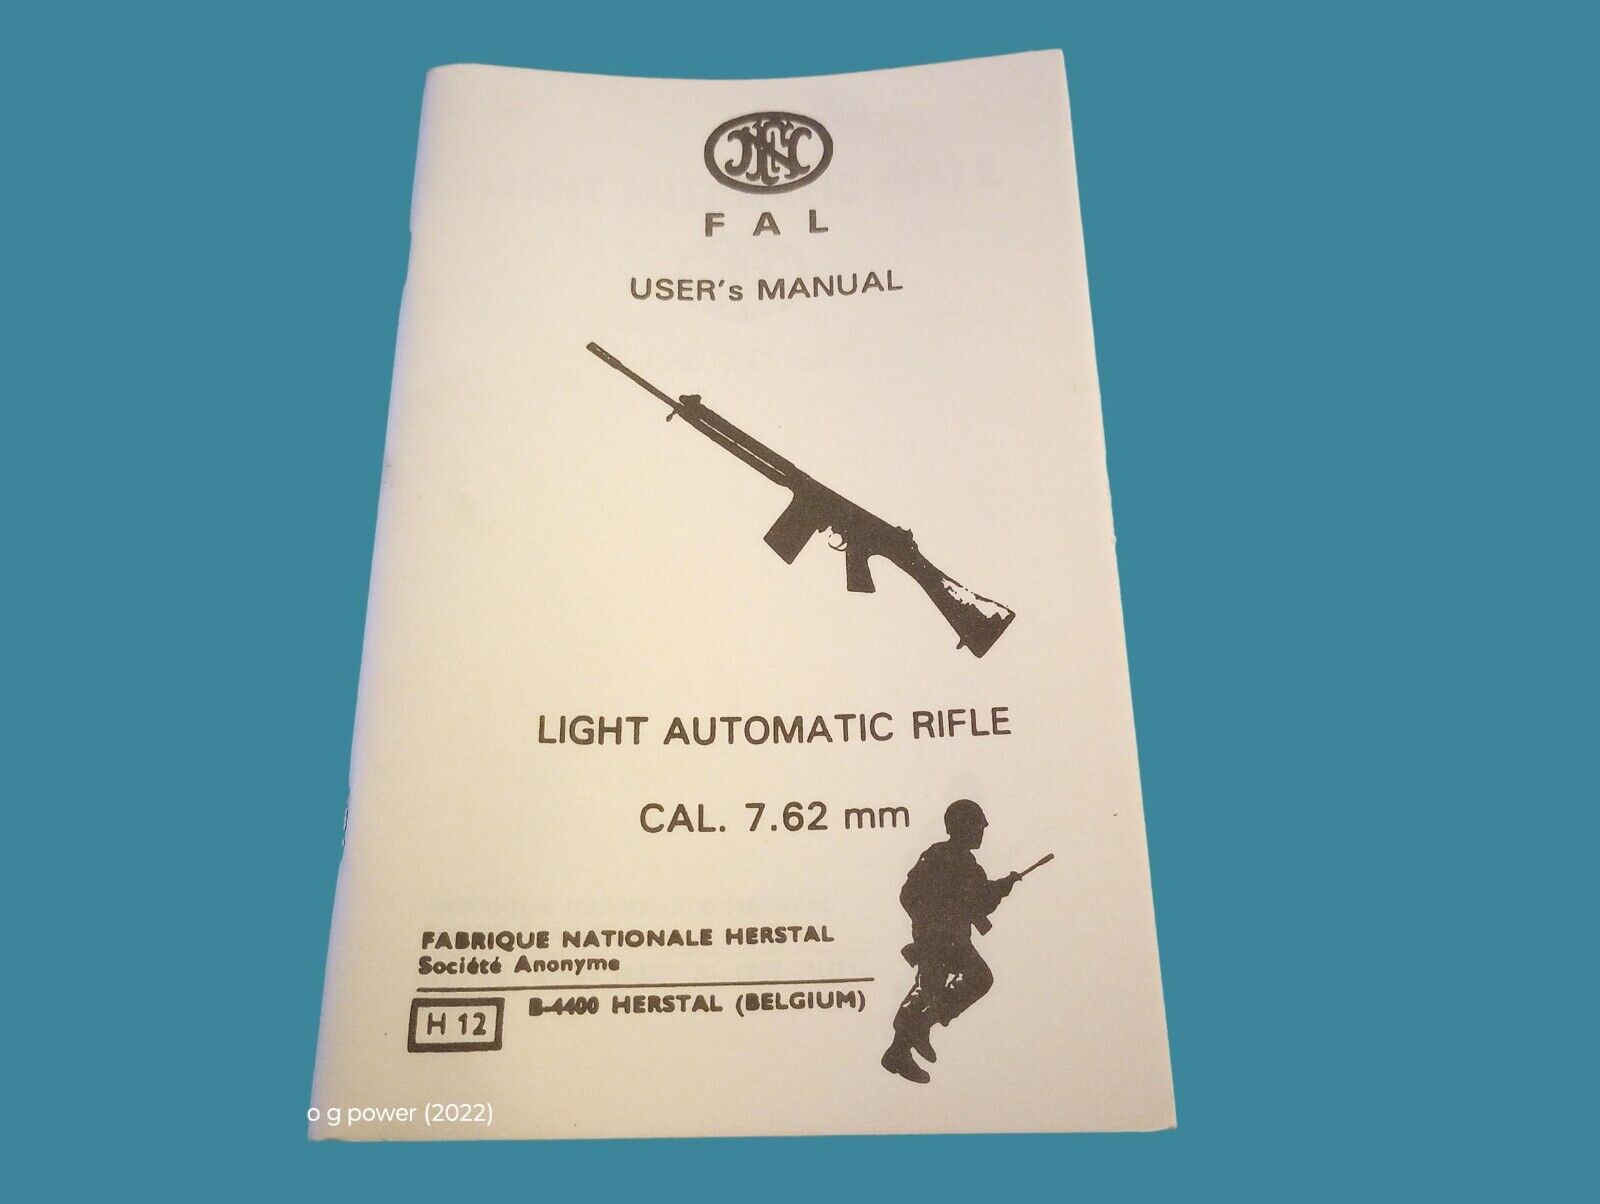 FN FAL USER\'S MANUAL LIGHT AUTOMATIC RIFLE 7.62 MM ILLUSTRATED OPERATOR\'S BOOK